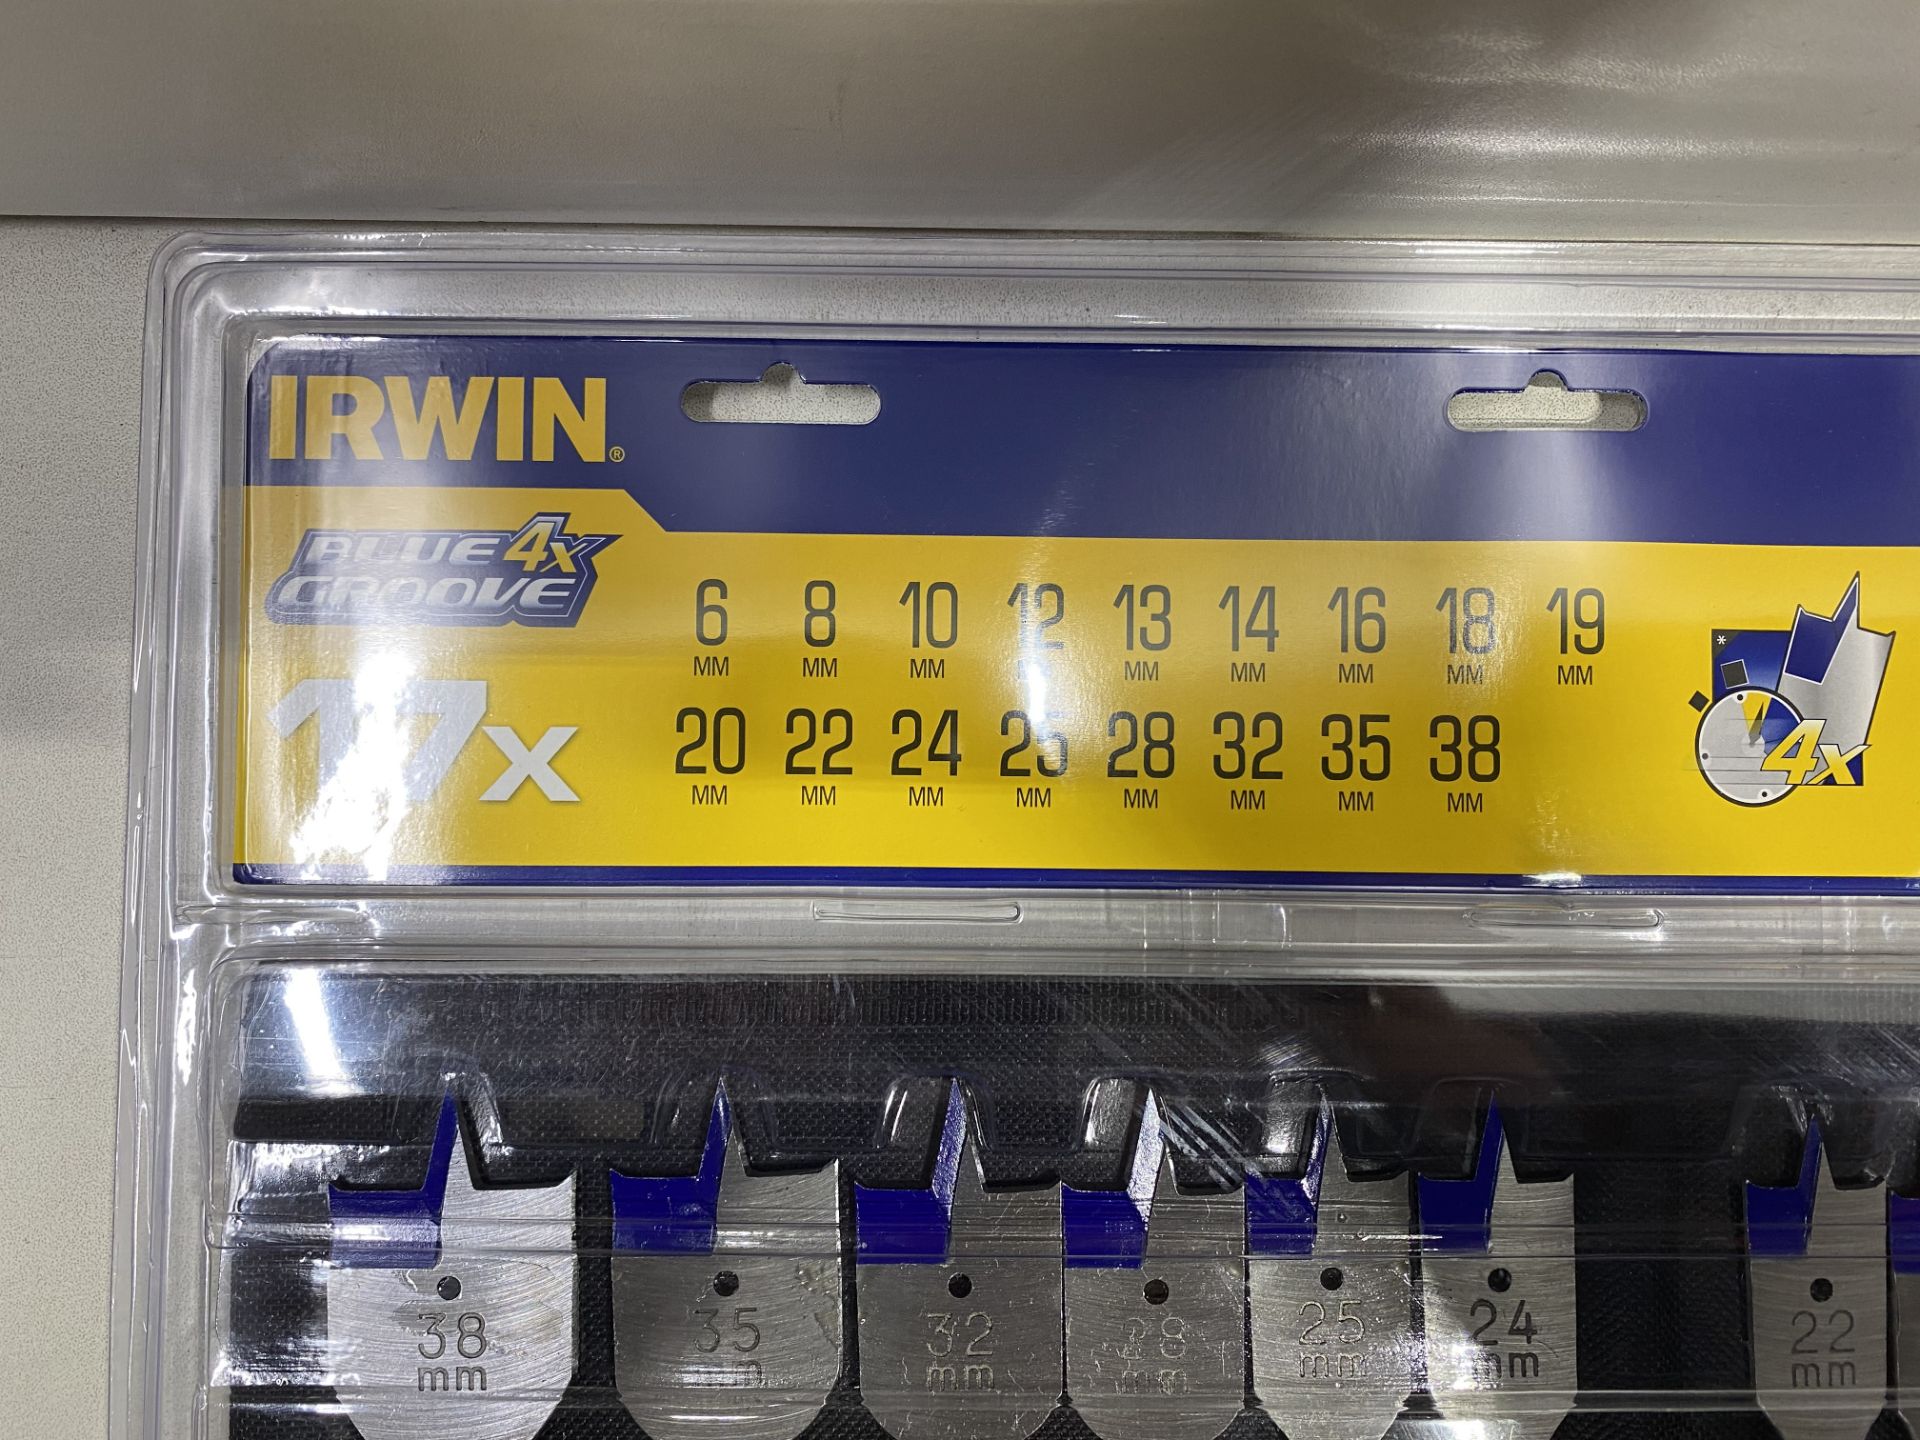 3 x Sets of Irwin Blue Groove 17 Piece Flat Spade Drill Bits | IRW1840636 | Total RRP £72 - Image 2 of 3